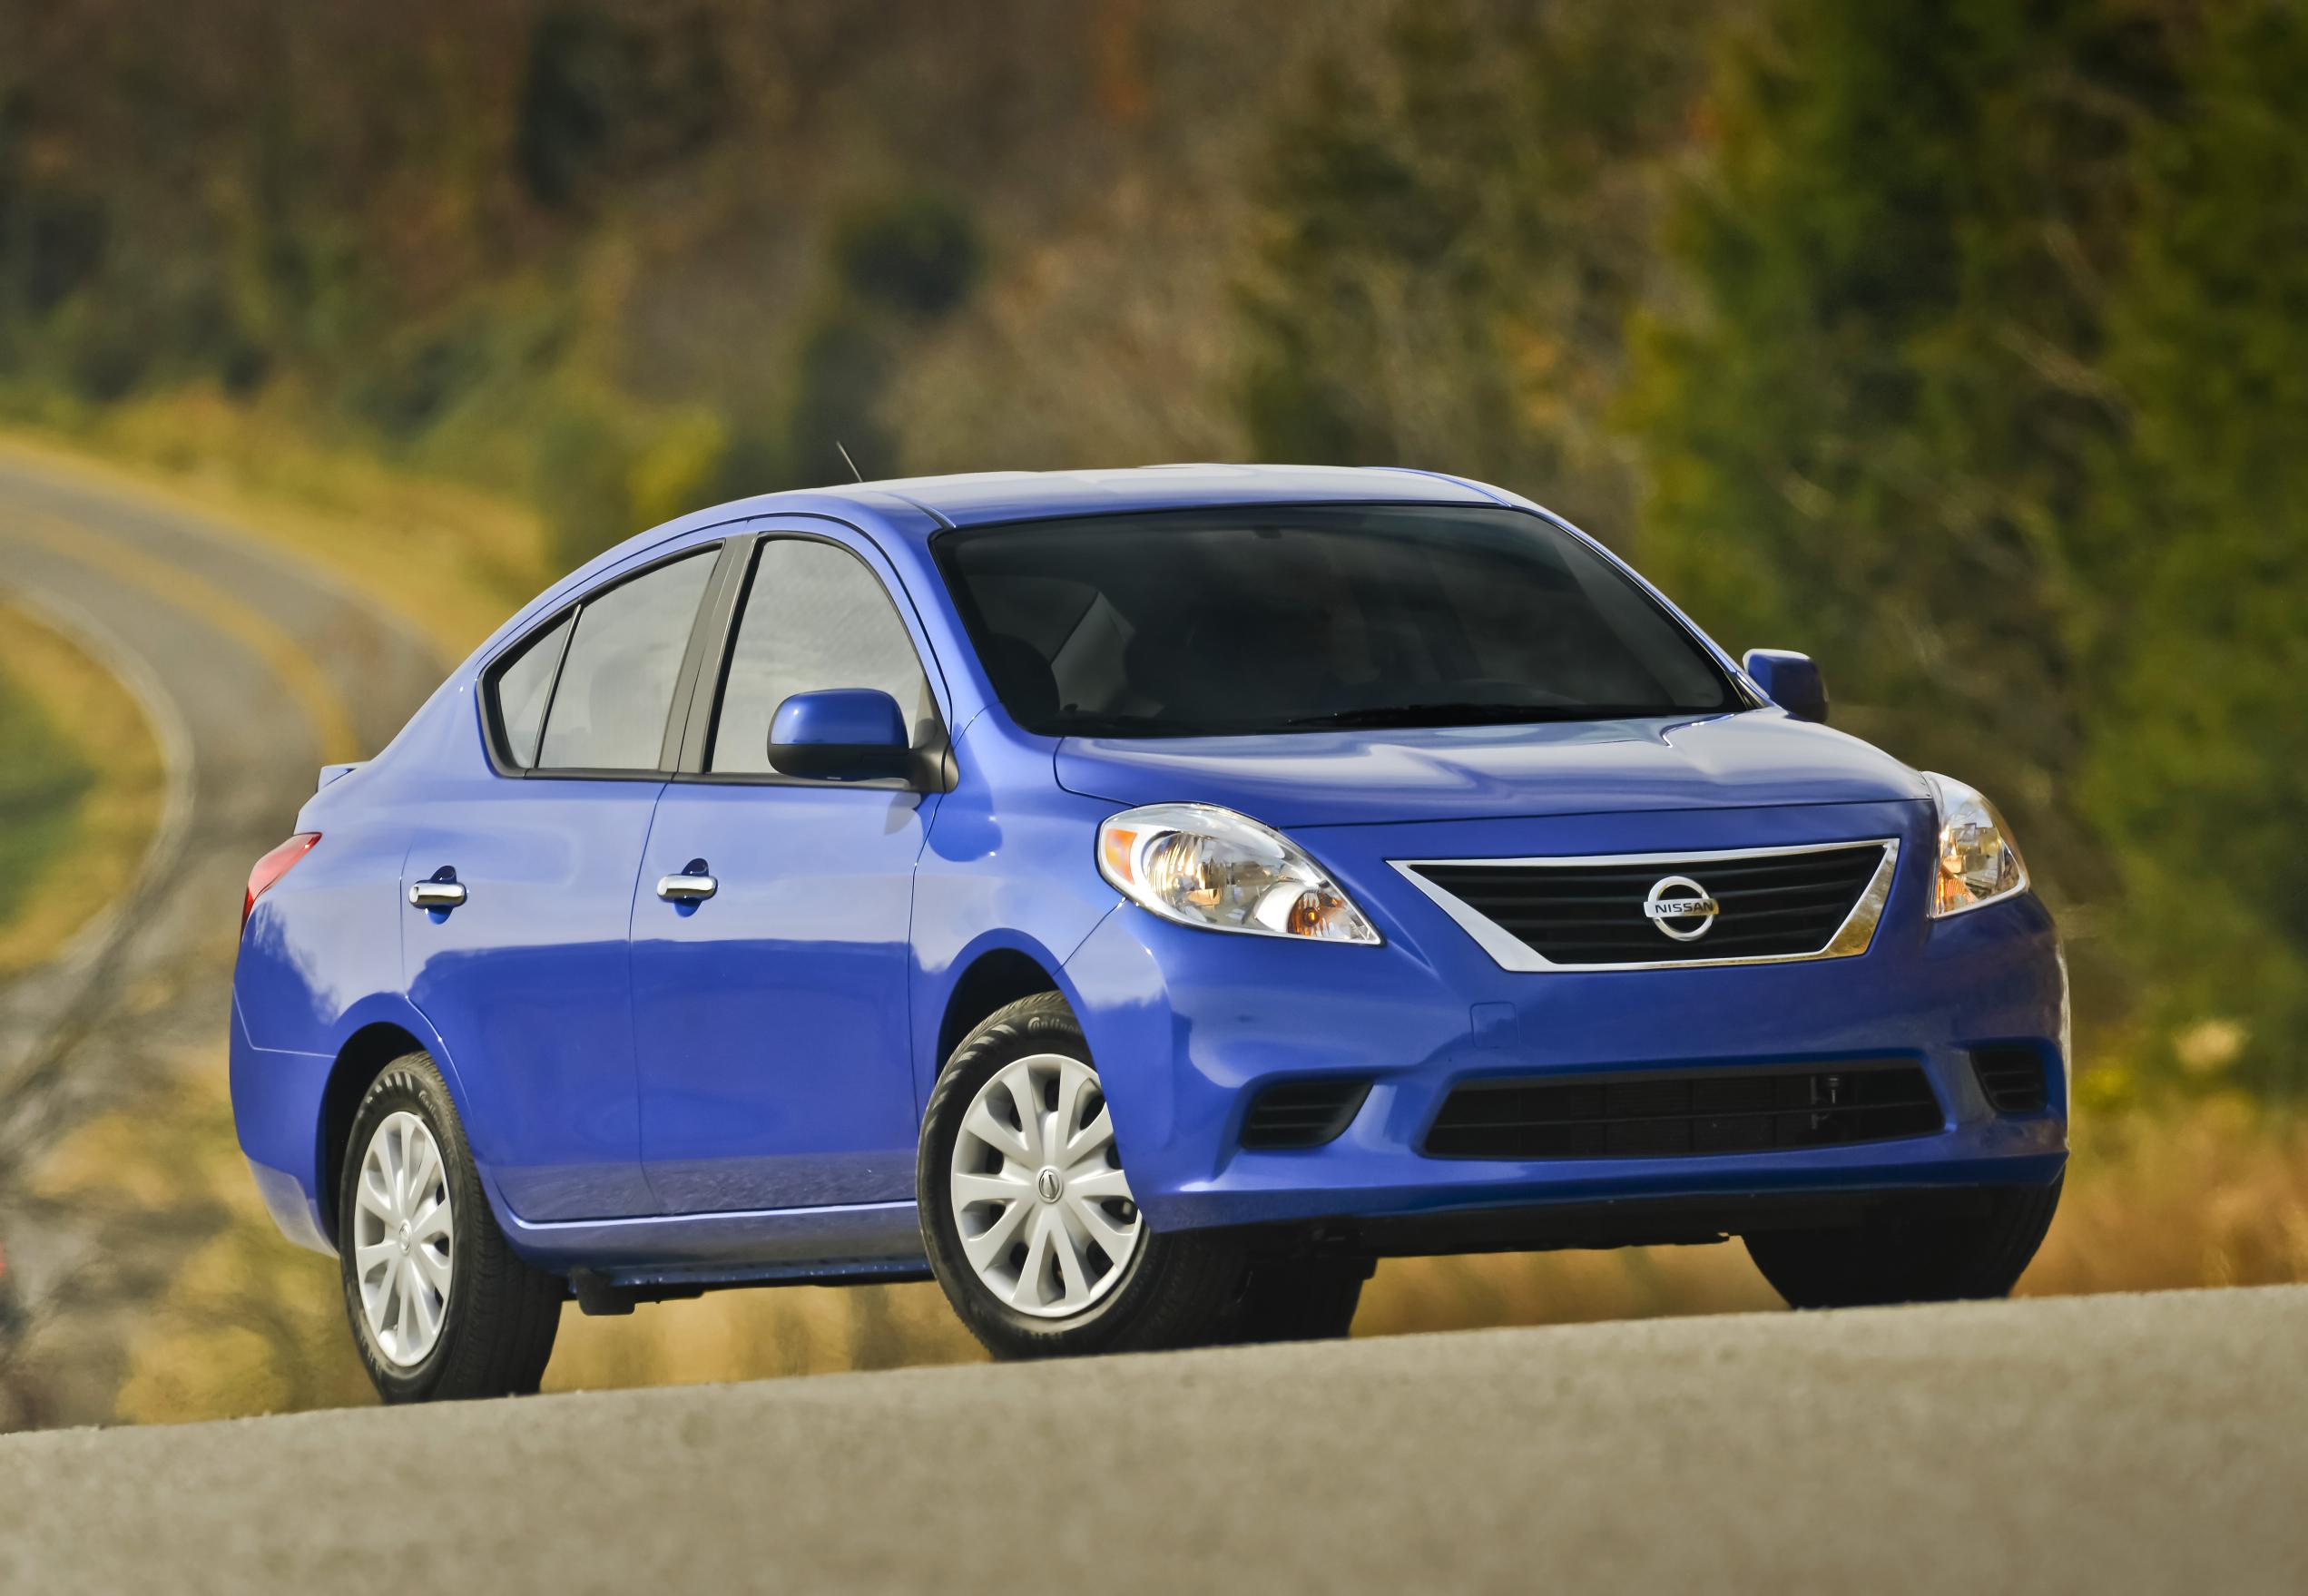 2014 Nissan Versa Review, Ratings, Specs, Prices, and Photos - The Car